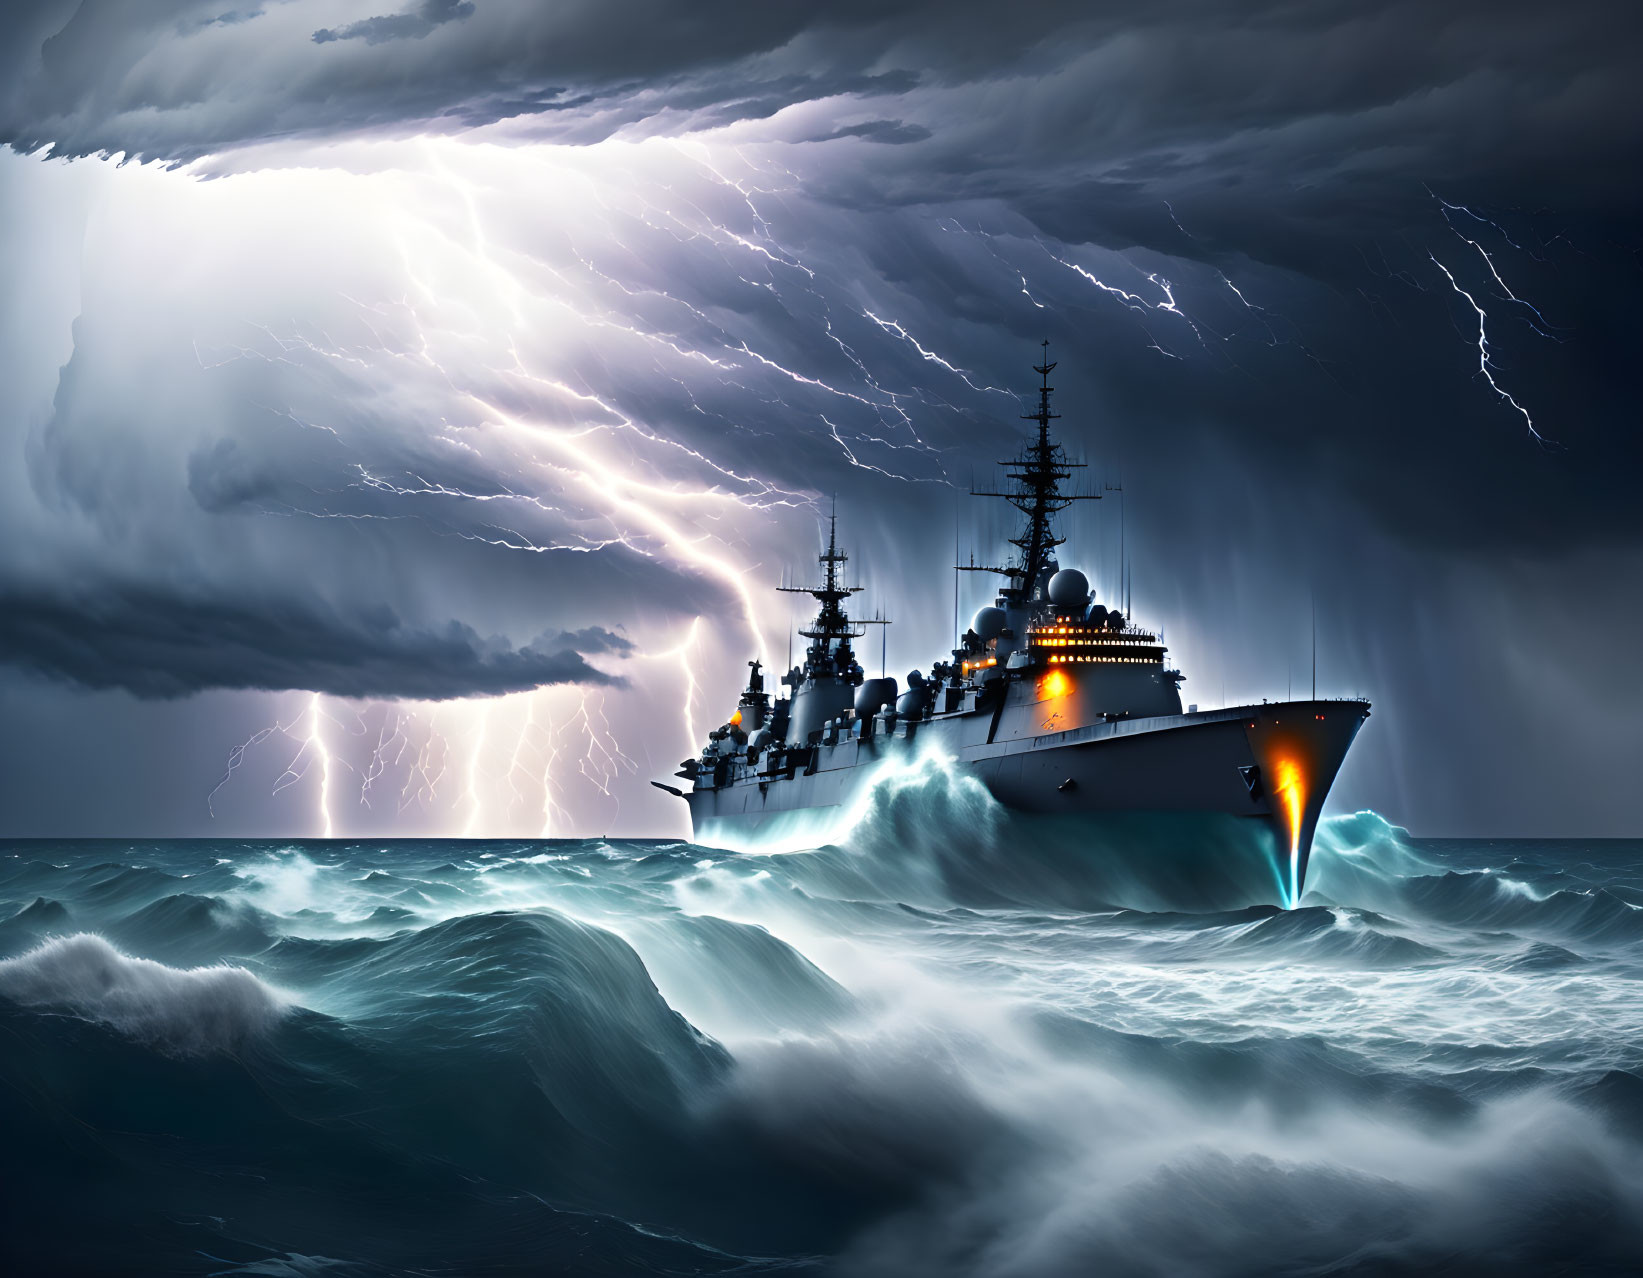 army ship in storm